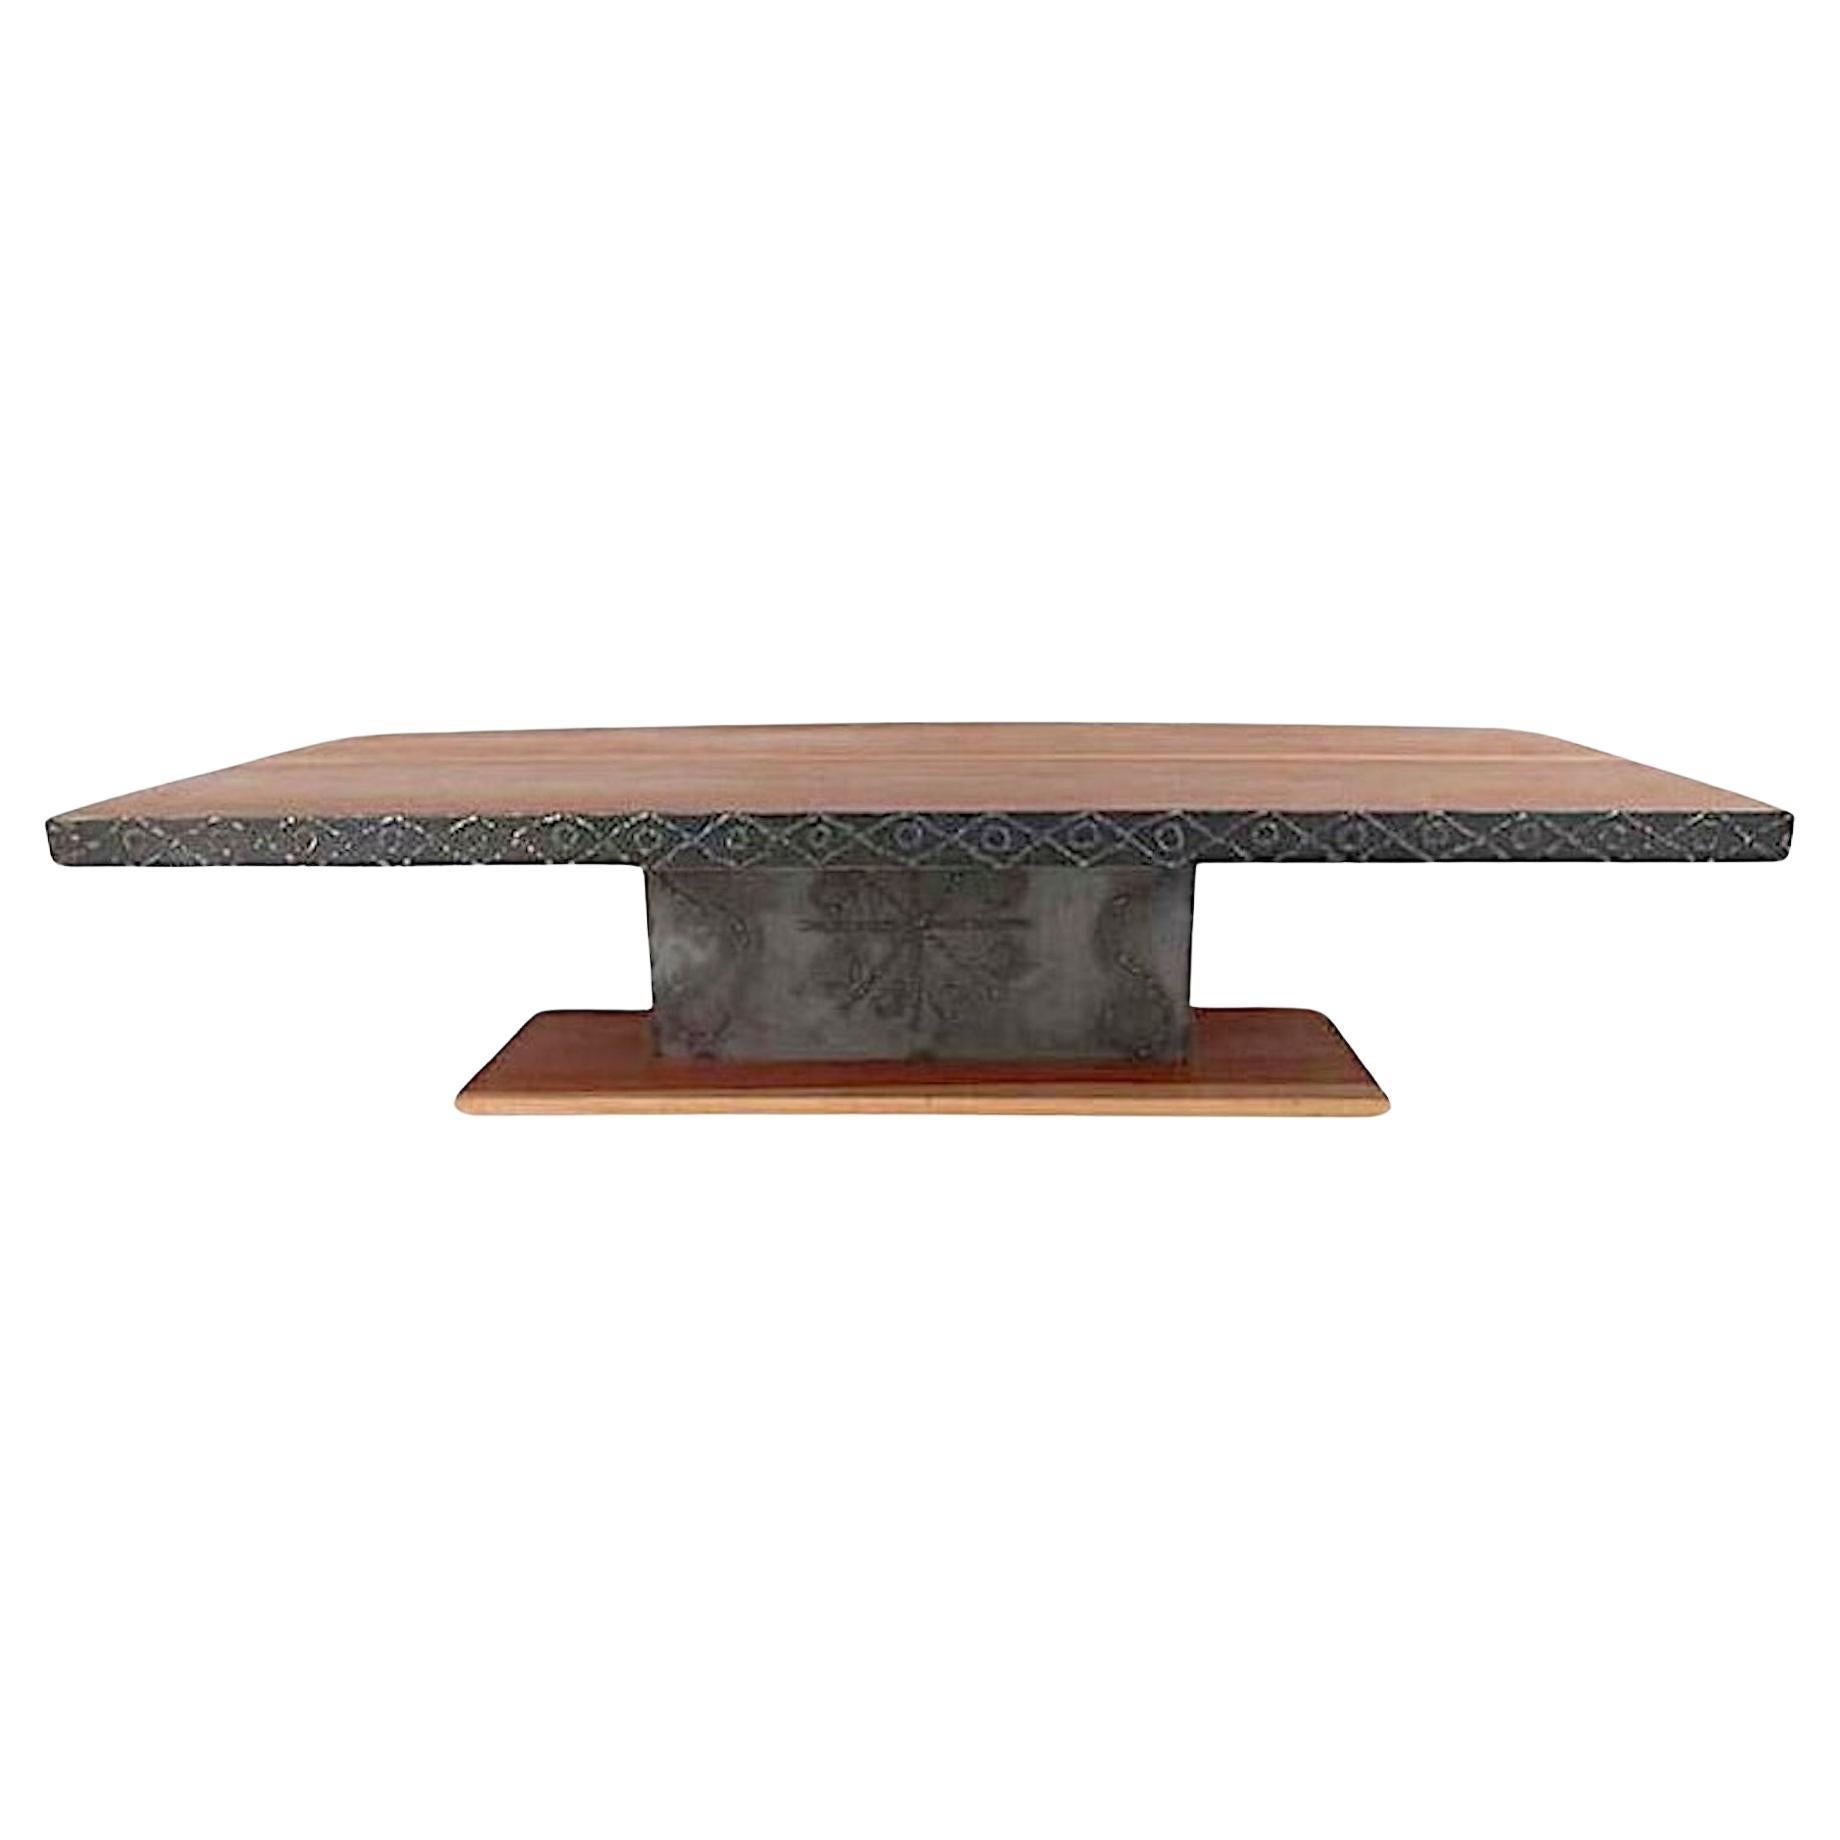 Artisinal Brutalist Coffee Table Signed by Garry Zayon For Sale